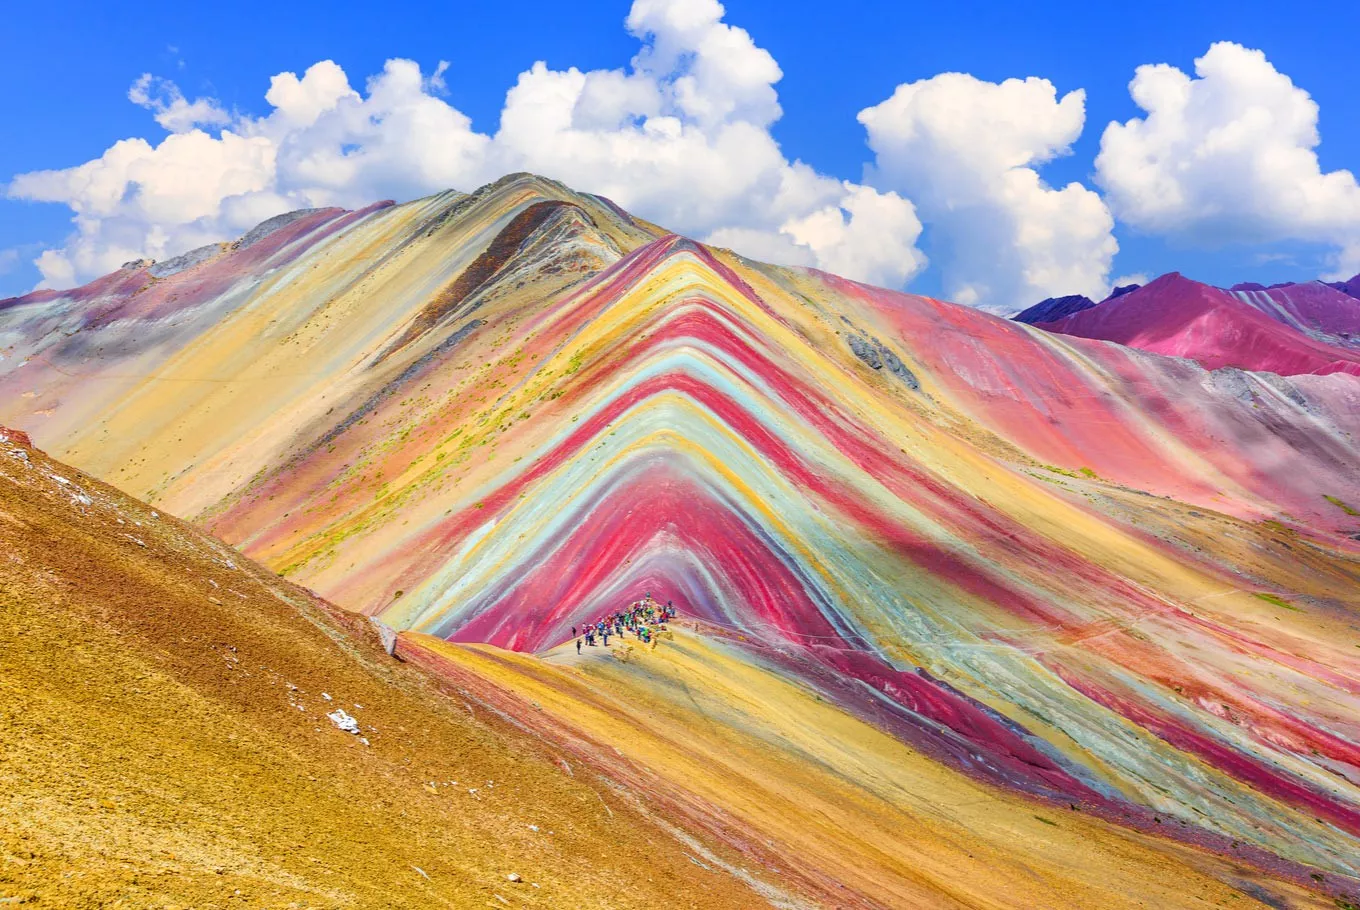 Vinicunca in Peru, South America | Mountains - Rated 5